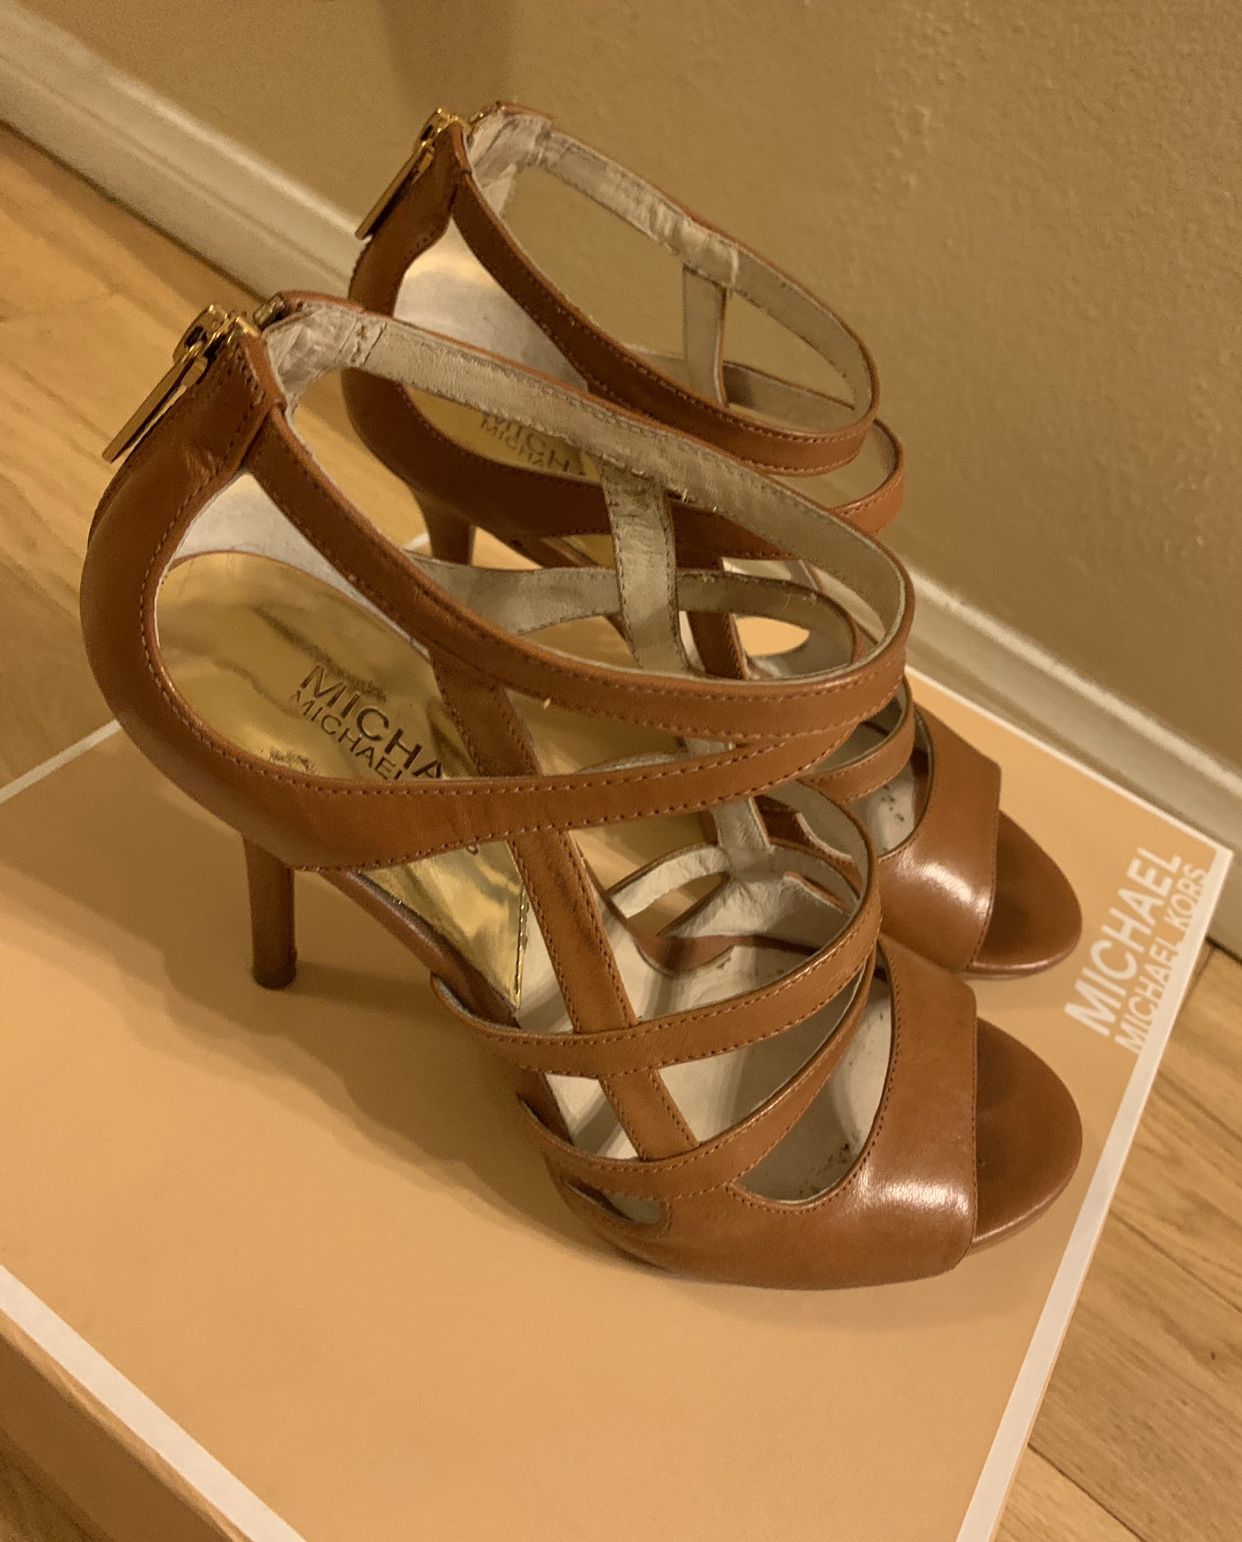 Michael Kors Leather Tan Heels Size 7 Used Once